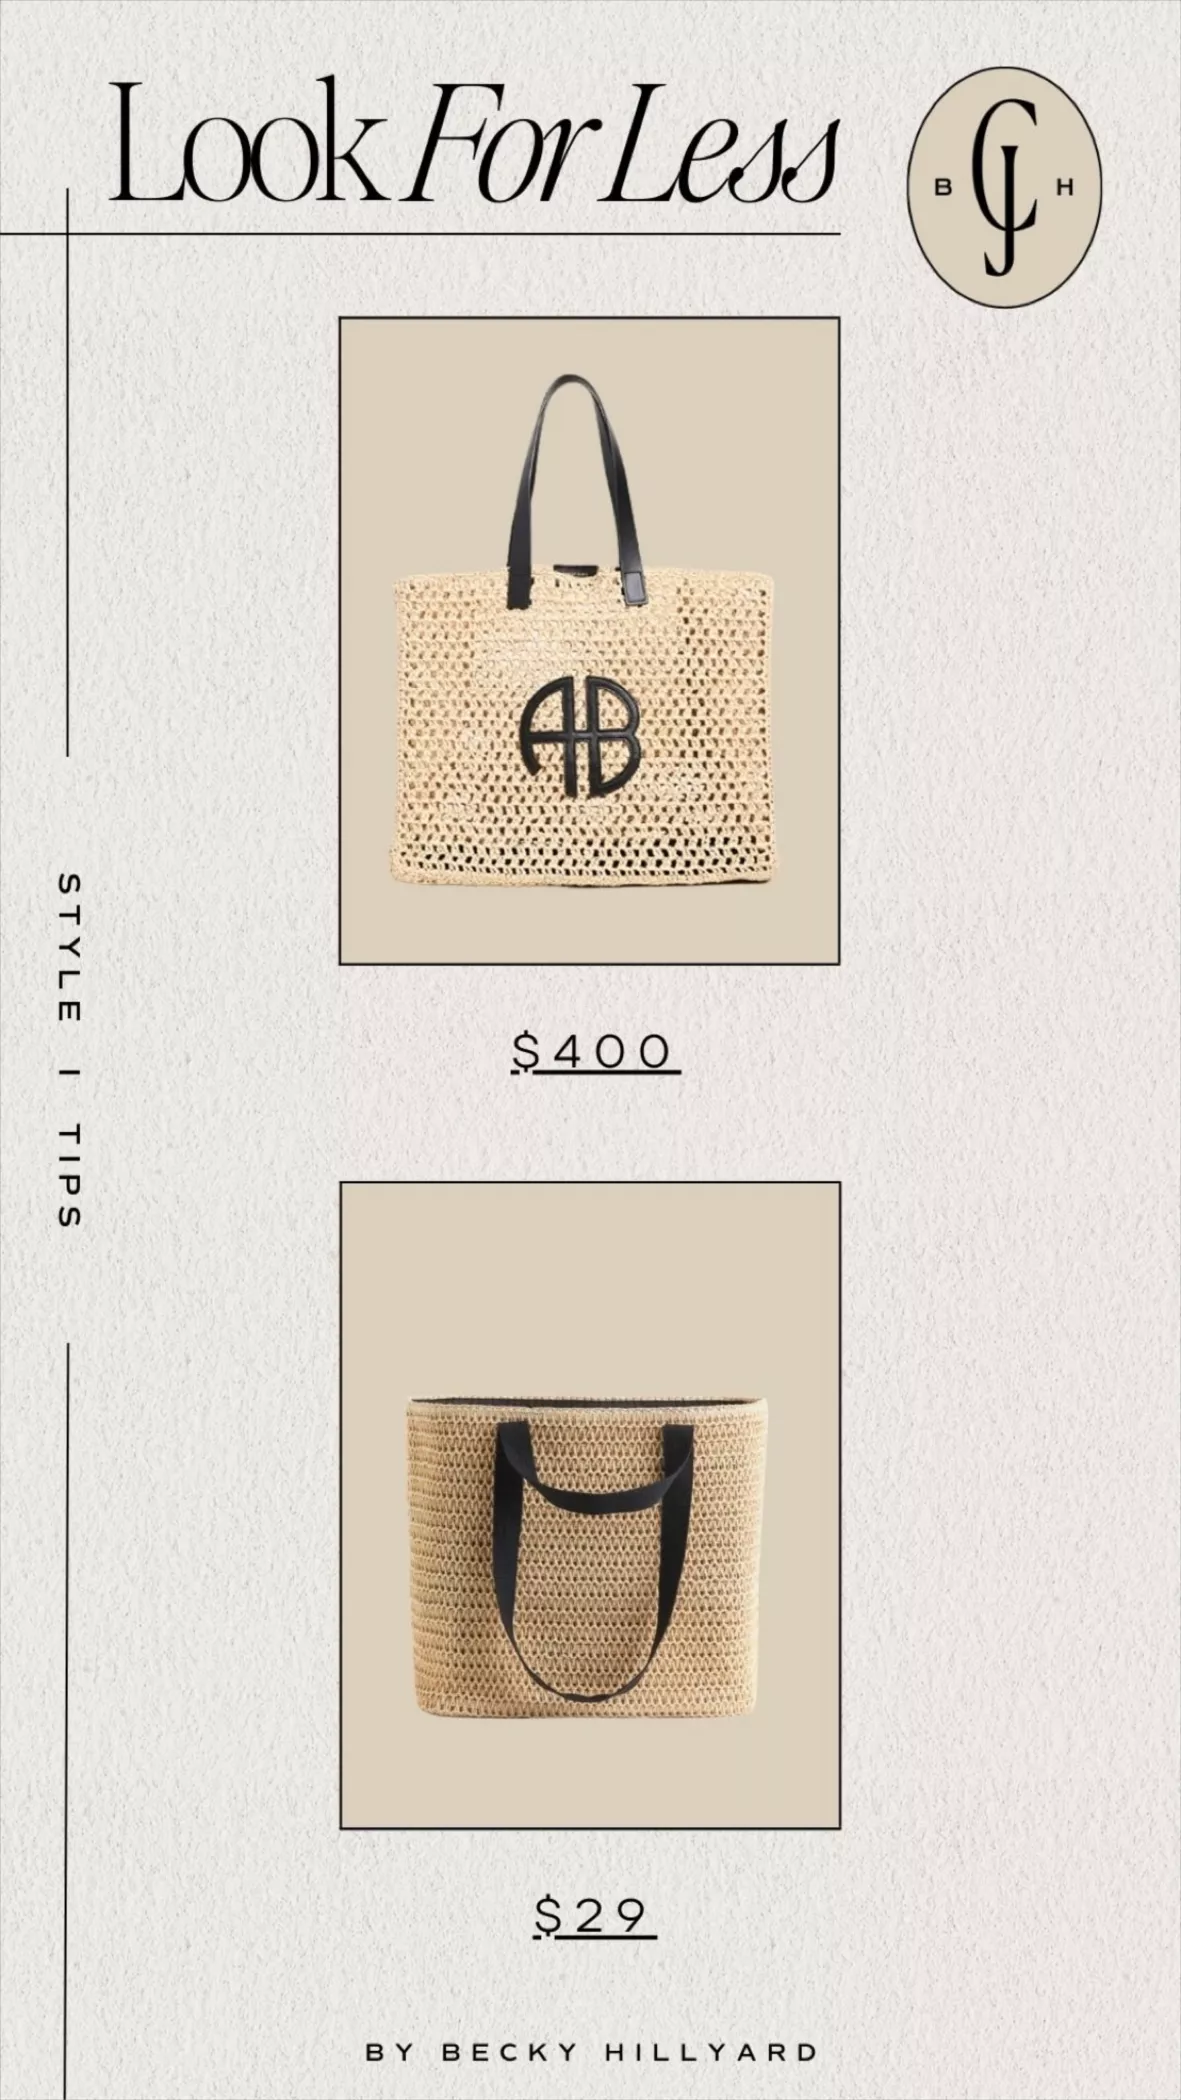 Cloth - Here is the Rio Tote XL Natural by Anine Bing. We